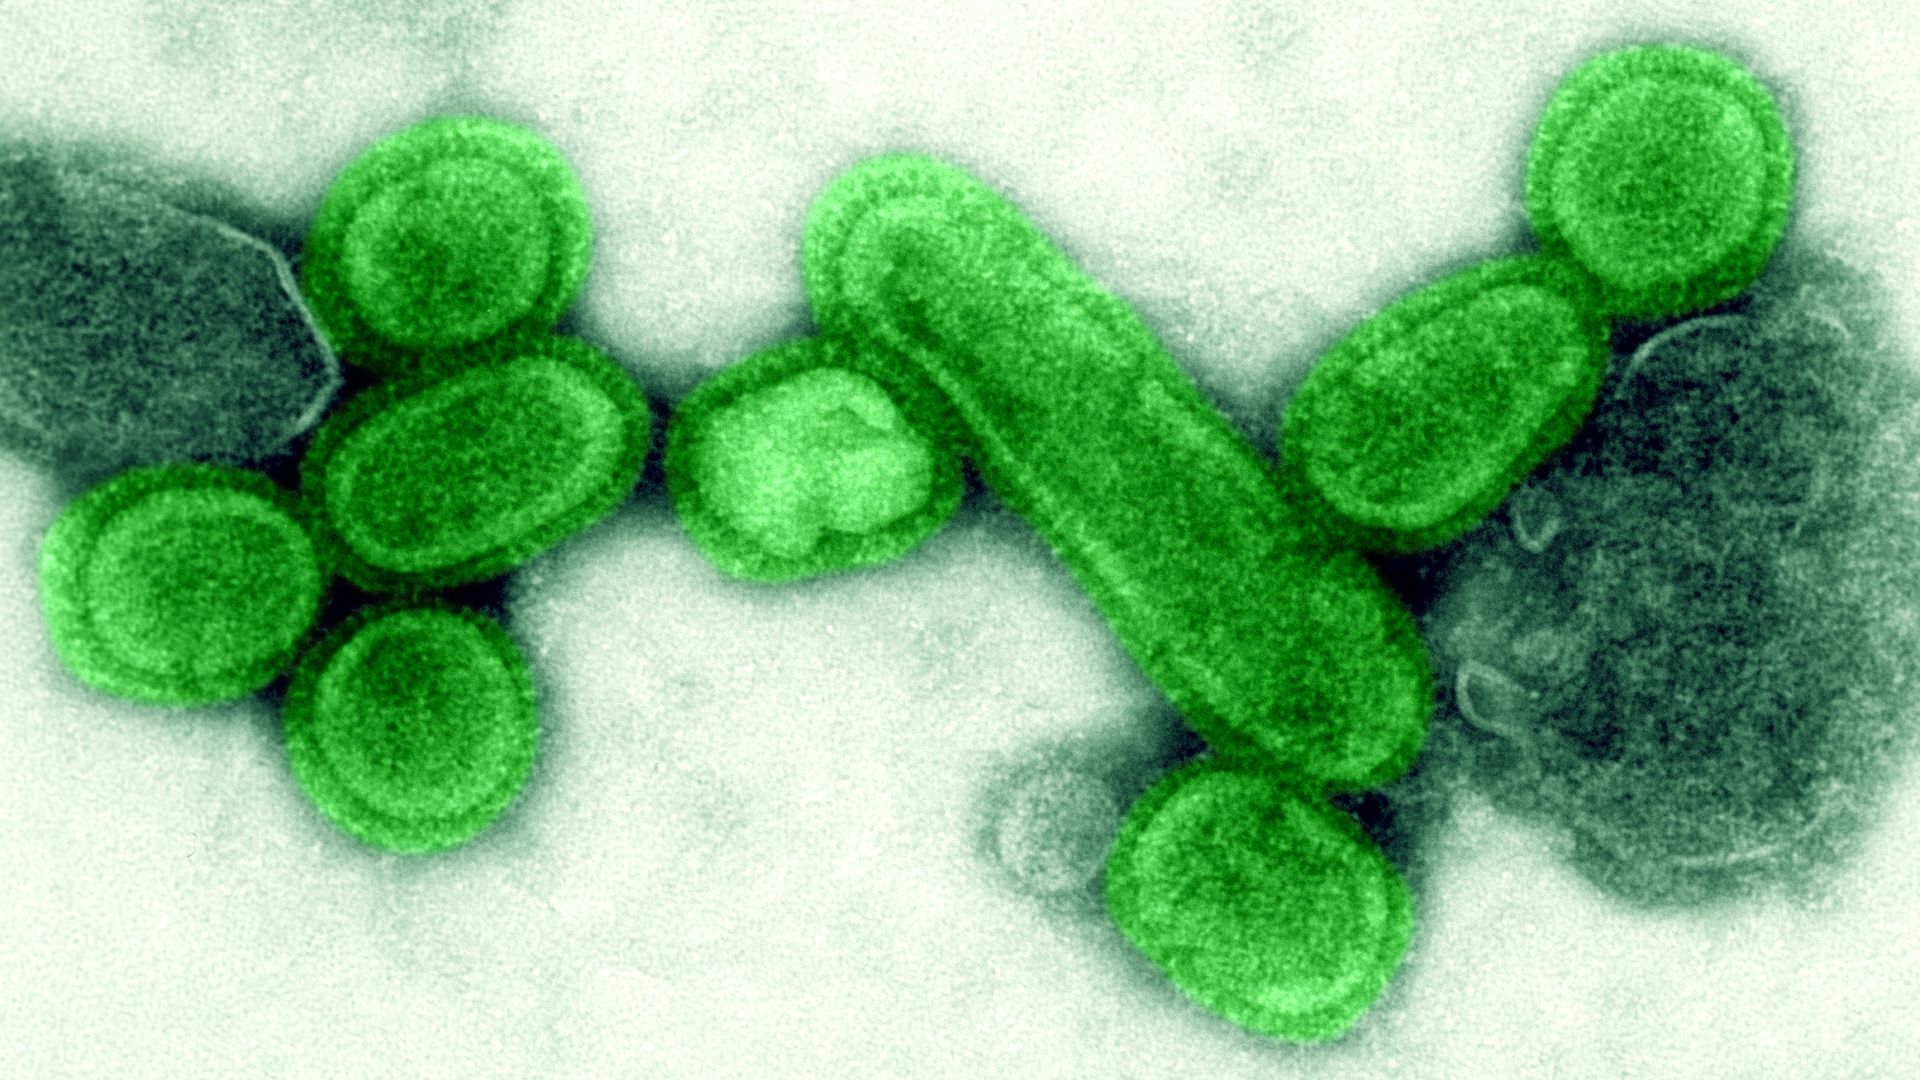 Images of green H1N1 virus, responsible for the deadly Spanish Flue outbreak in 1918